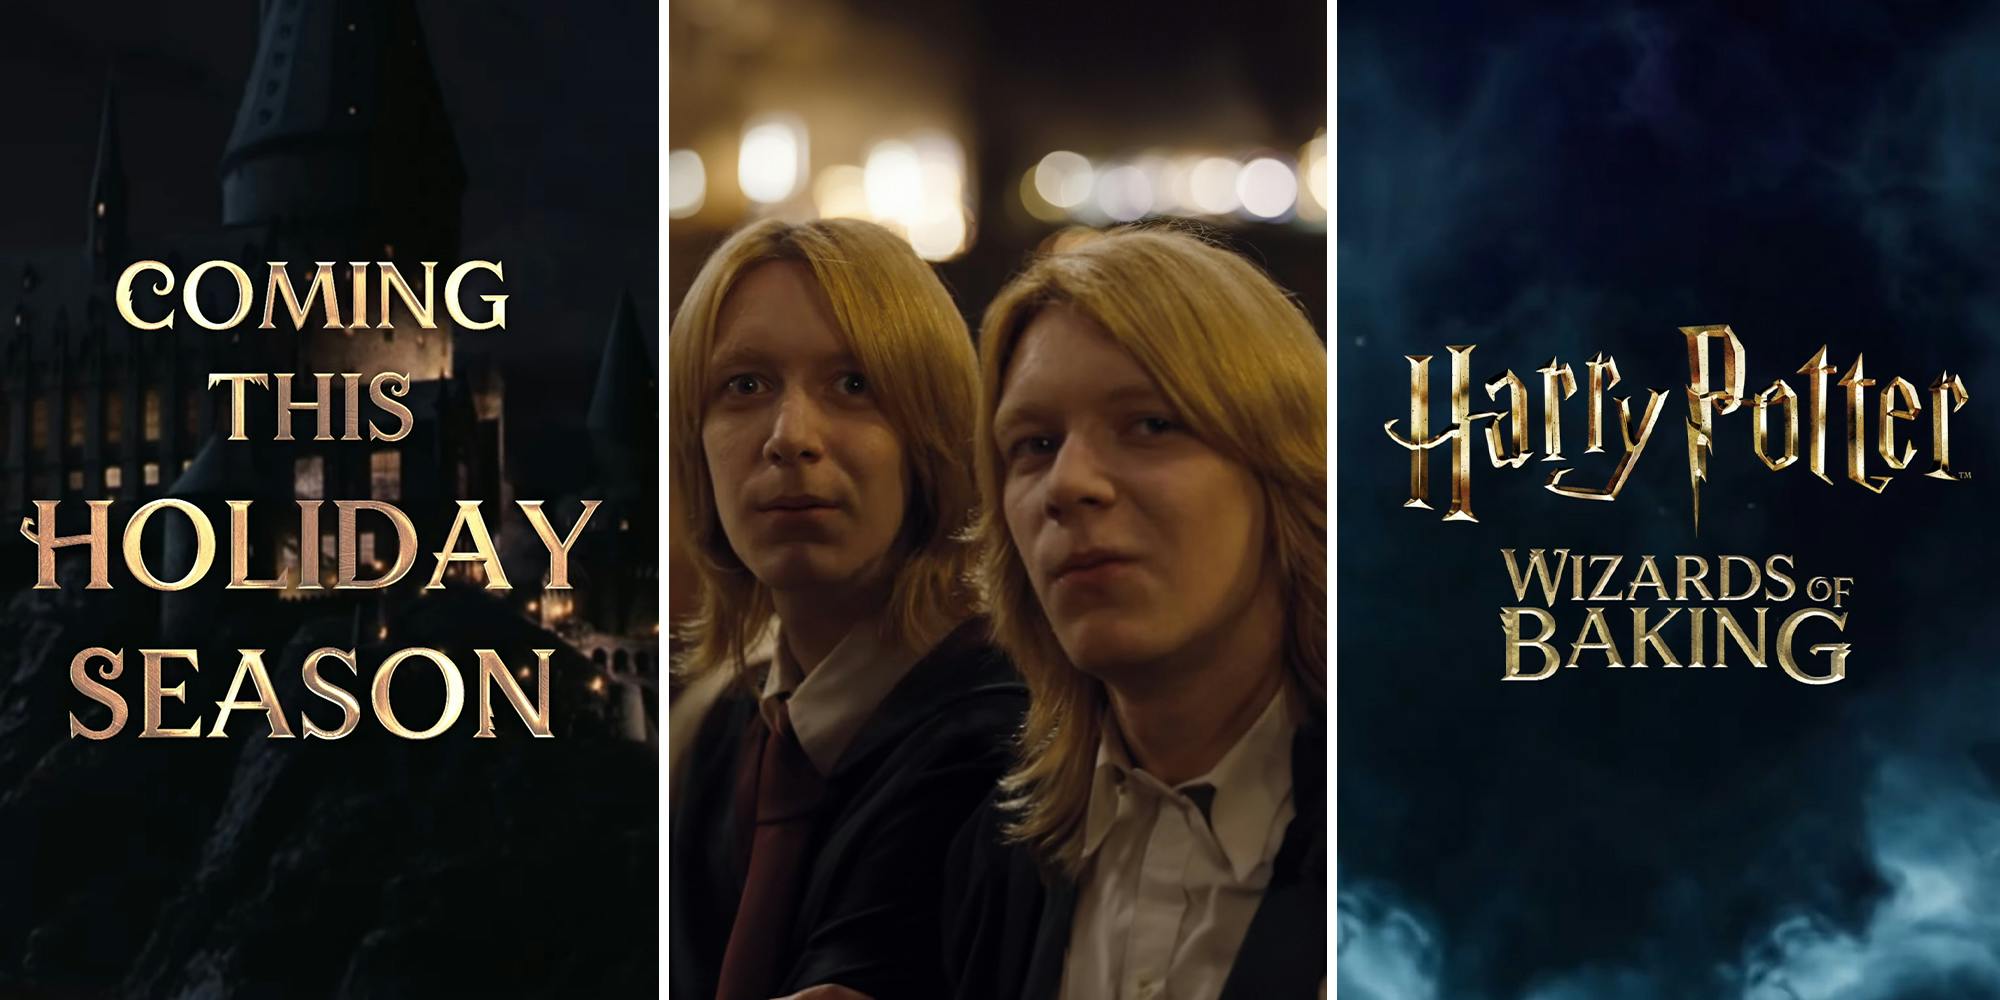 Harry Potter baking show greenlit, hosted by the Weasley Twins